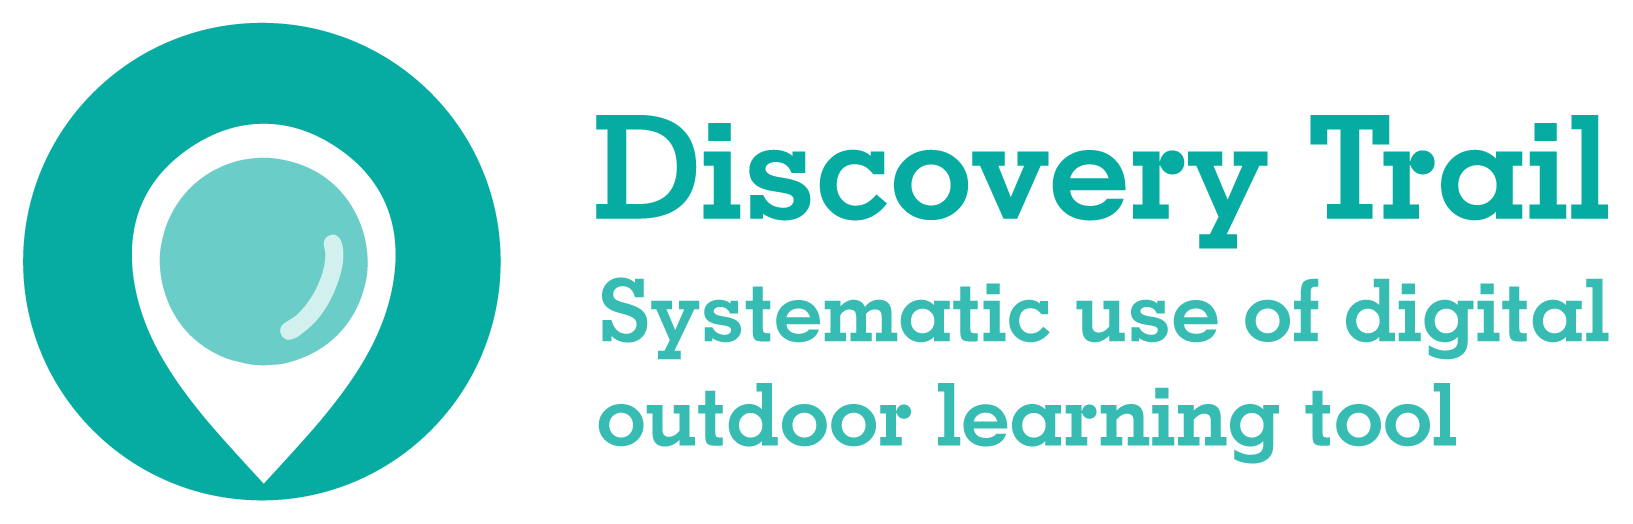 Discovery Trail logo